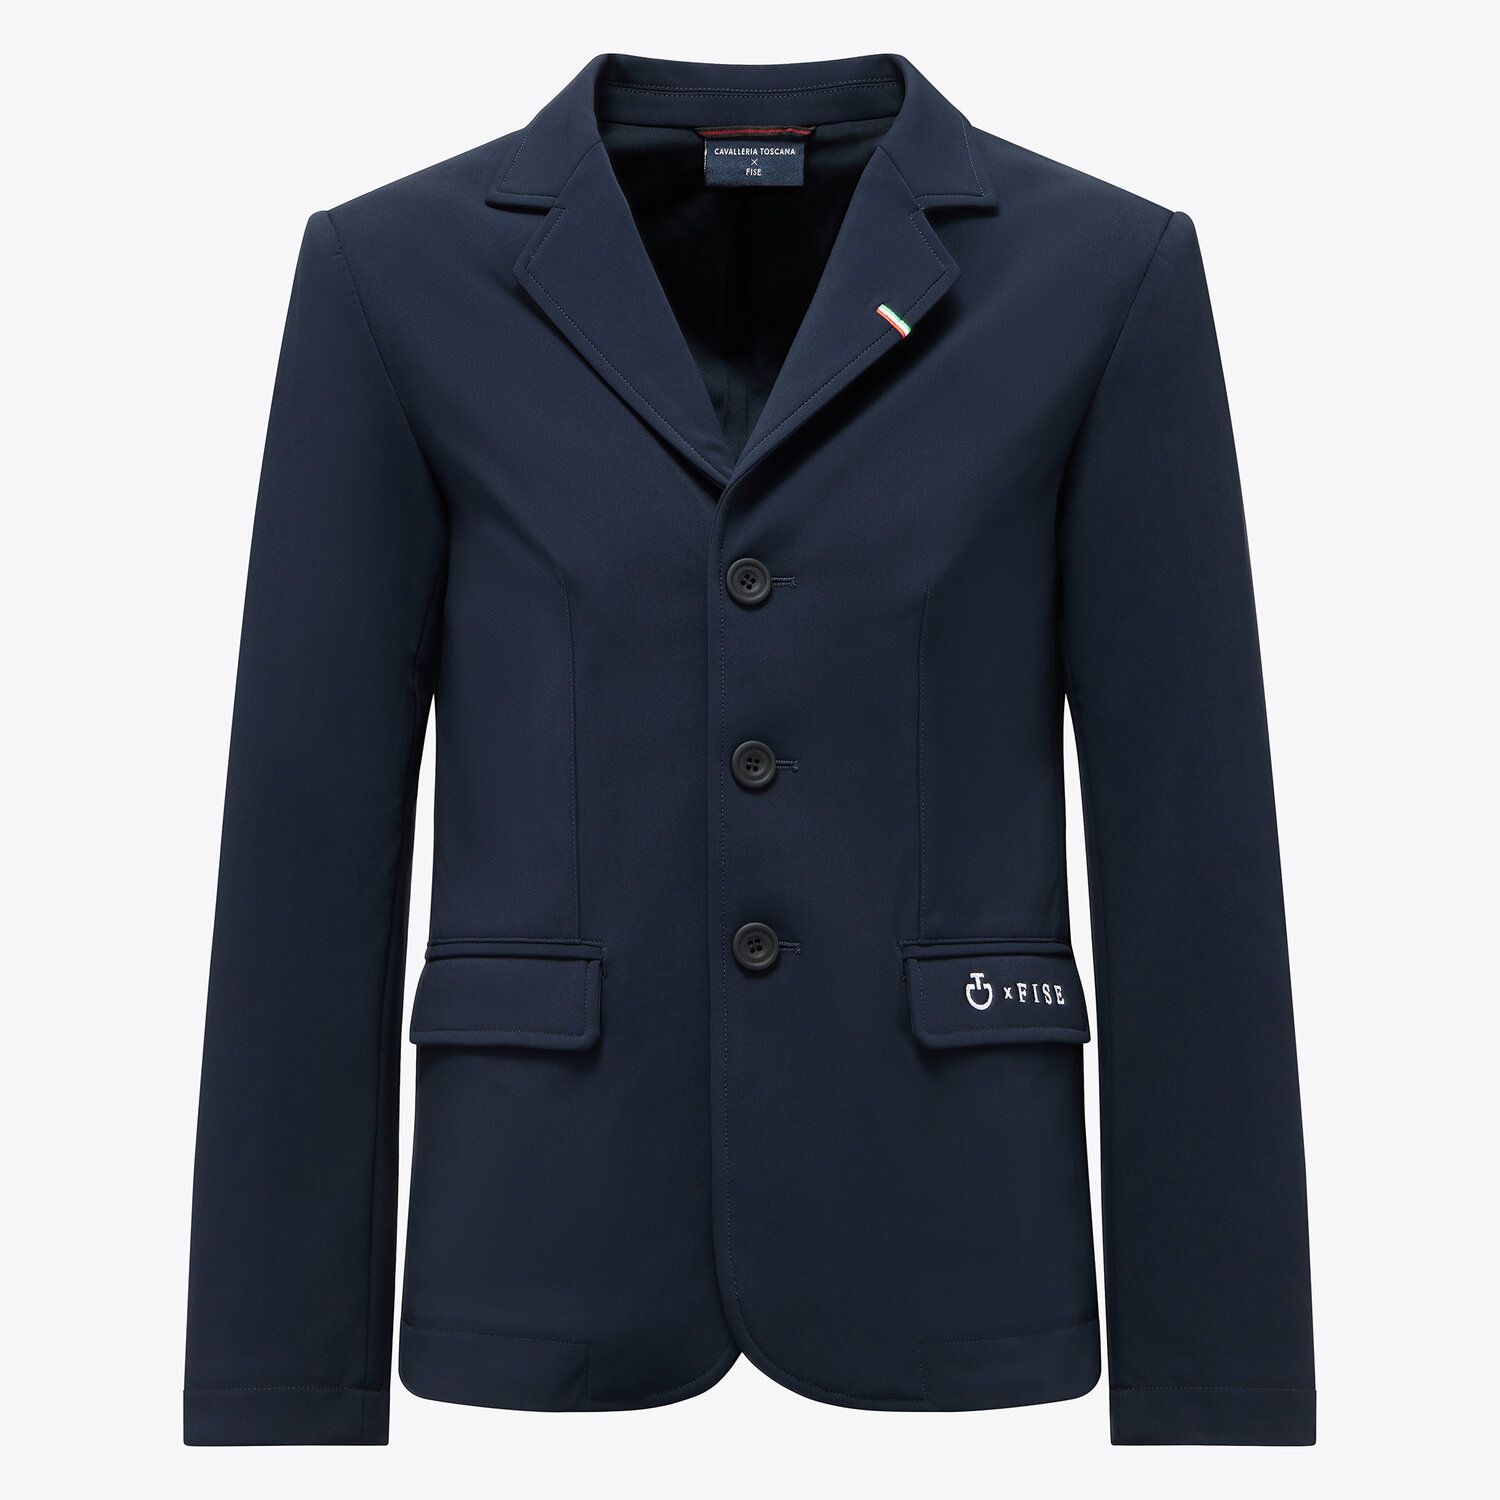 Cavalleria Toscana BOY'S COMPETITION RIDING JACKET FISE NAVY-1